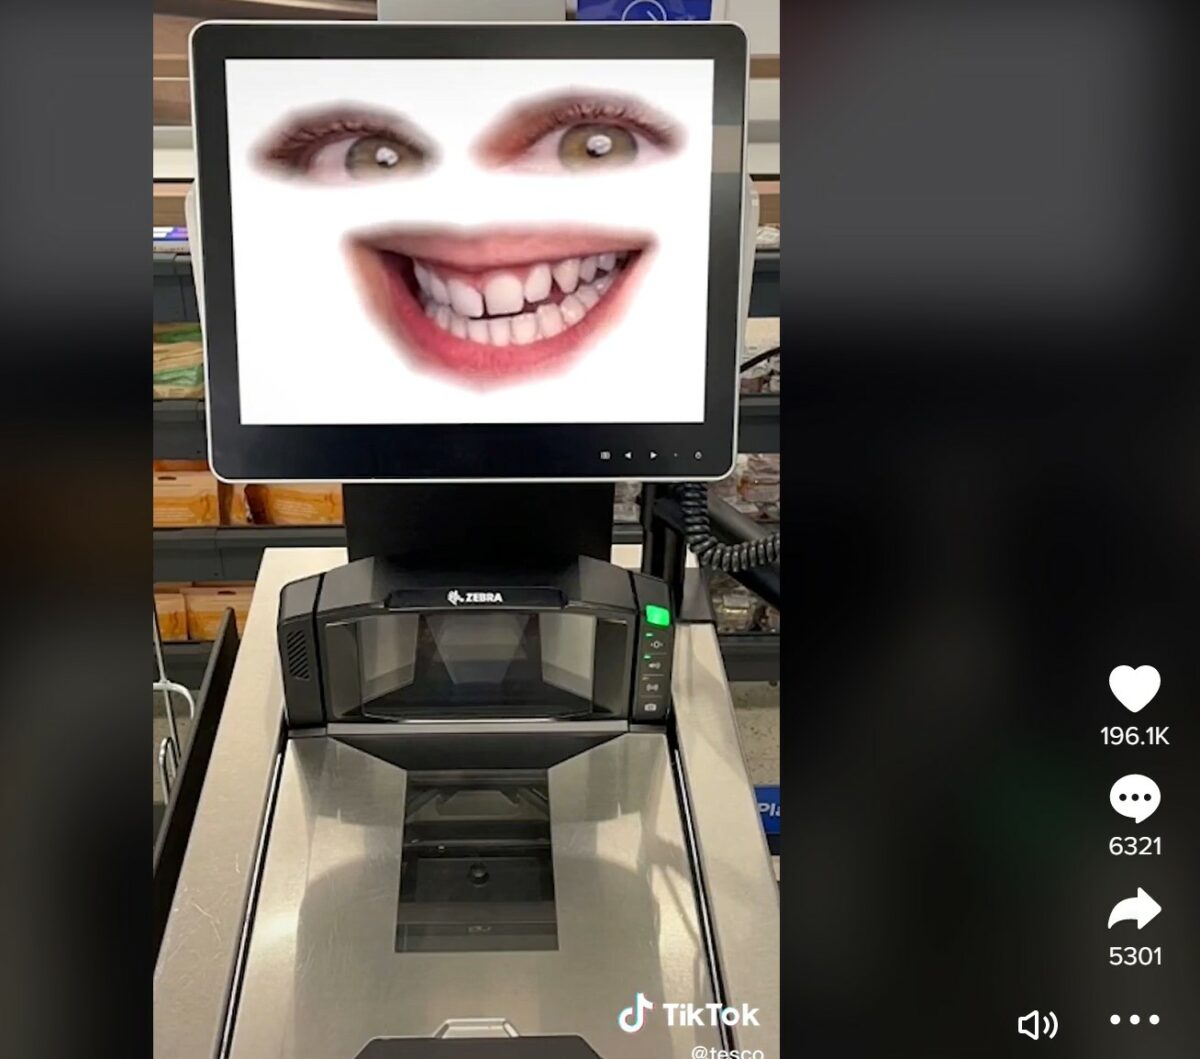 Tesco is offering Clubcard members across the UK the chance to become the voice shoppers hear at checkouts in its latest TikTok competition.